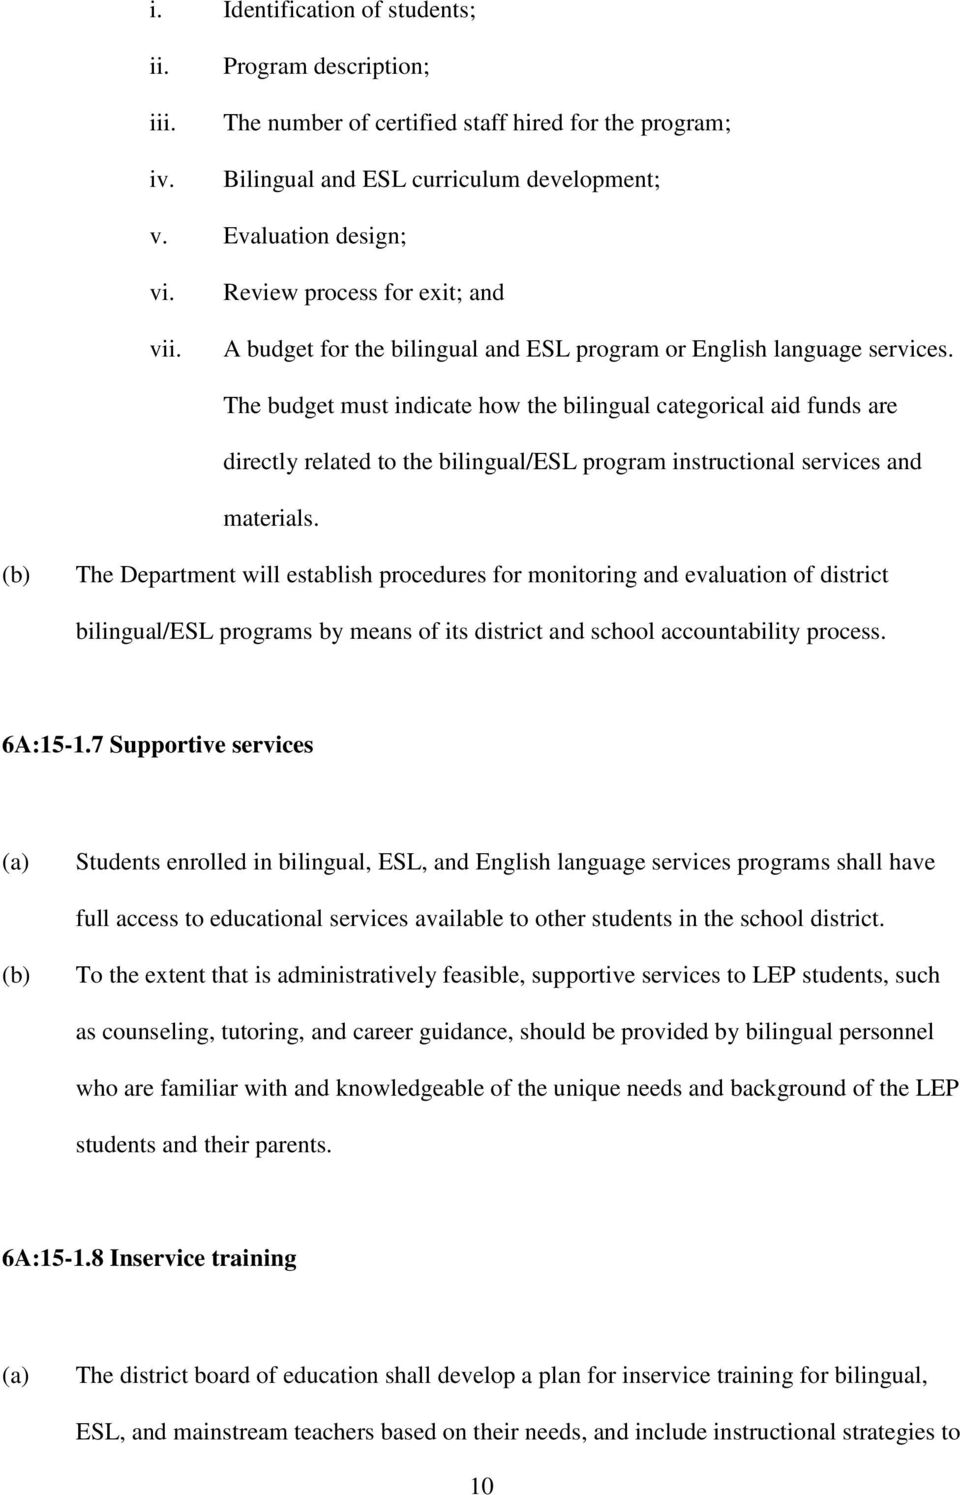 The budget must indicate how the bilingual categorical aid funds are directly related to the bilingual/esl program instructional services and materials.